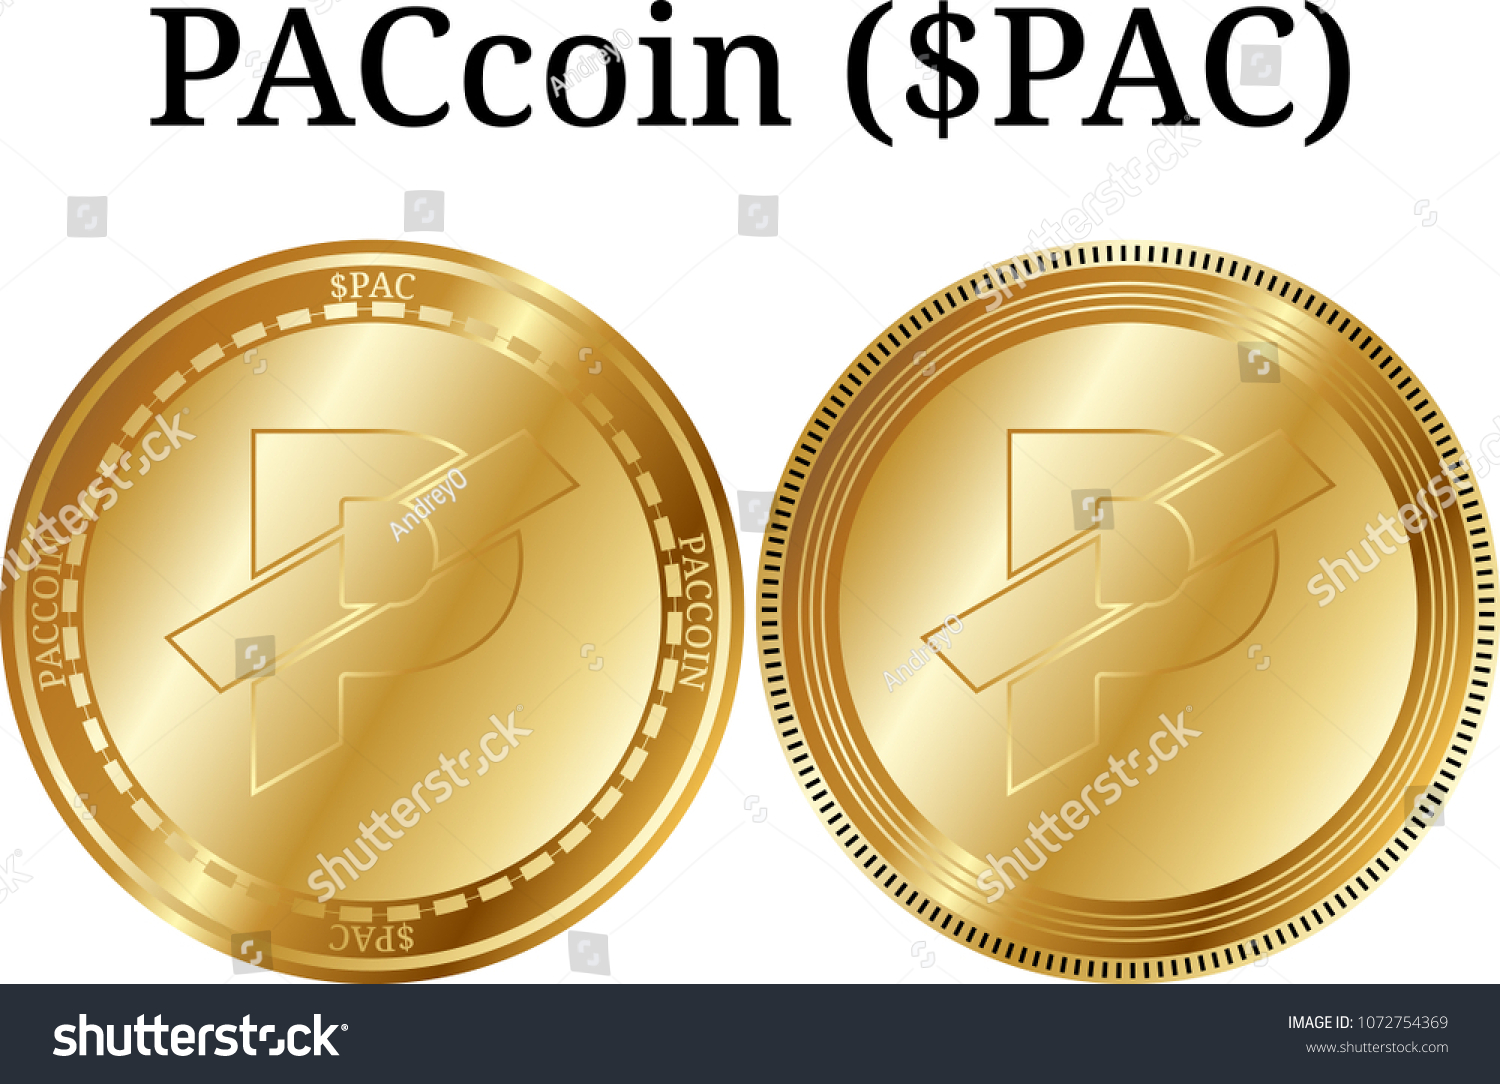 What is pac coin cryptocurrency best crypto wallet for multiple currencies